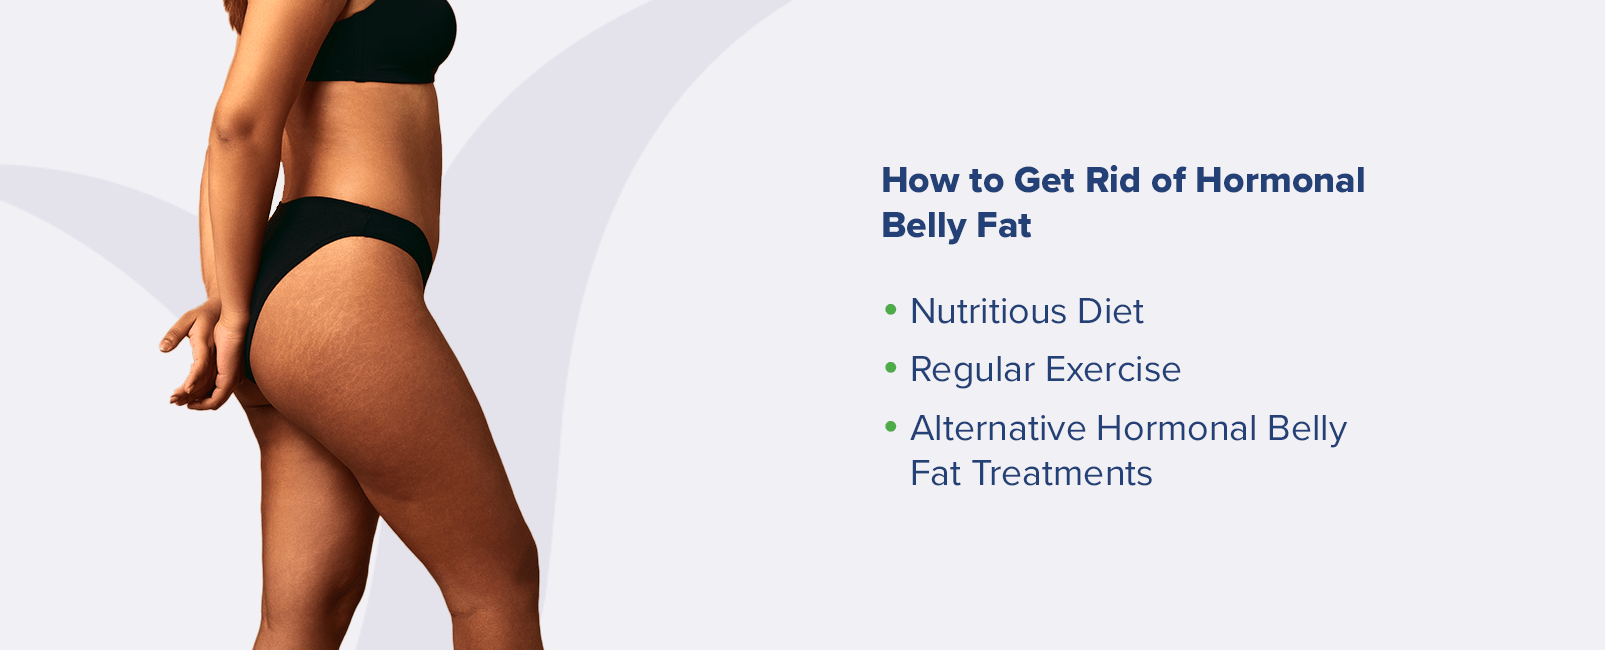 6 Hormonal Belly Causes - How to Get Rid of Hormonal Belly Fat